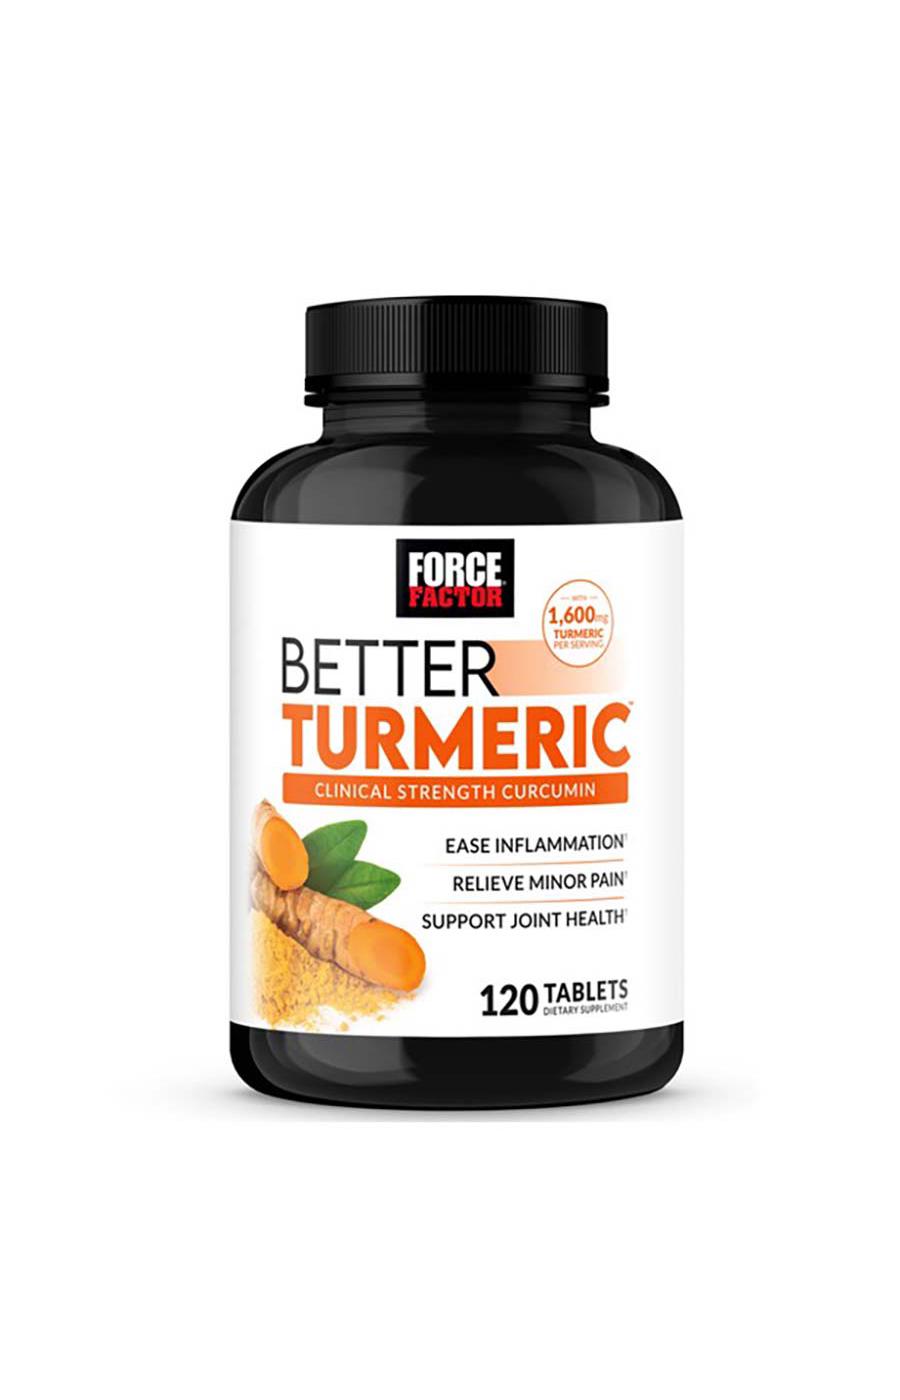 Force Factor Better Turmeric Tablets; image 2 of 3